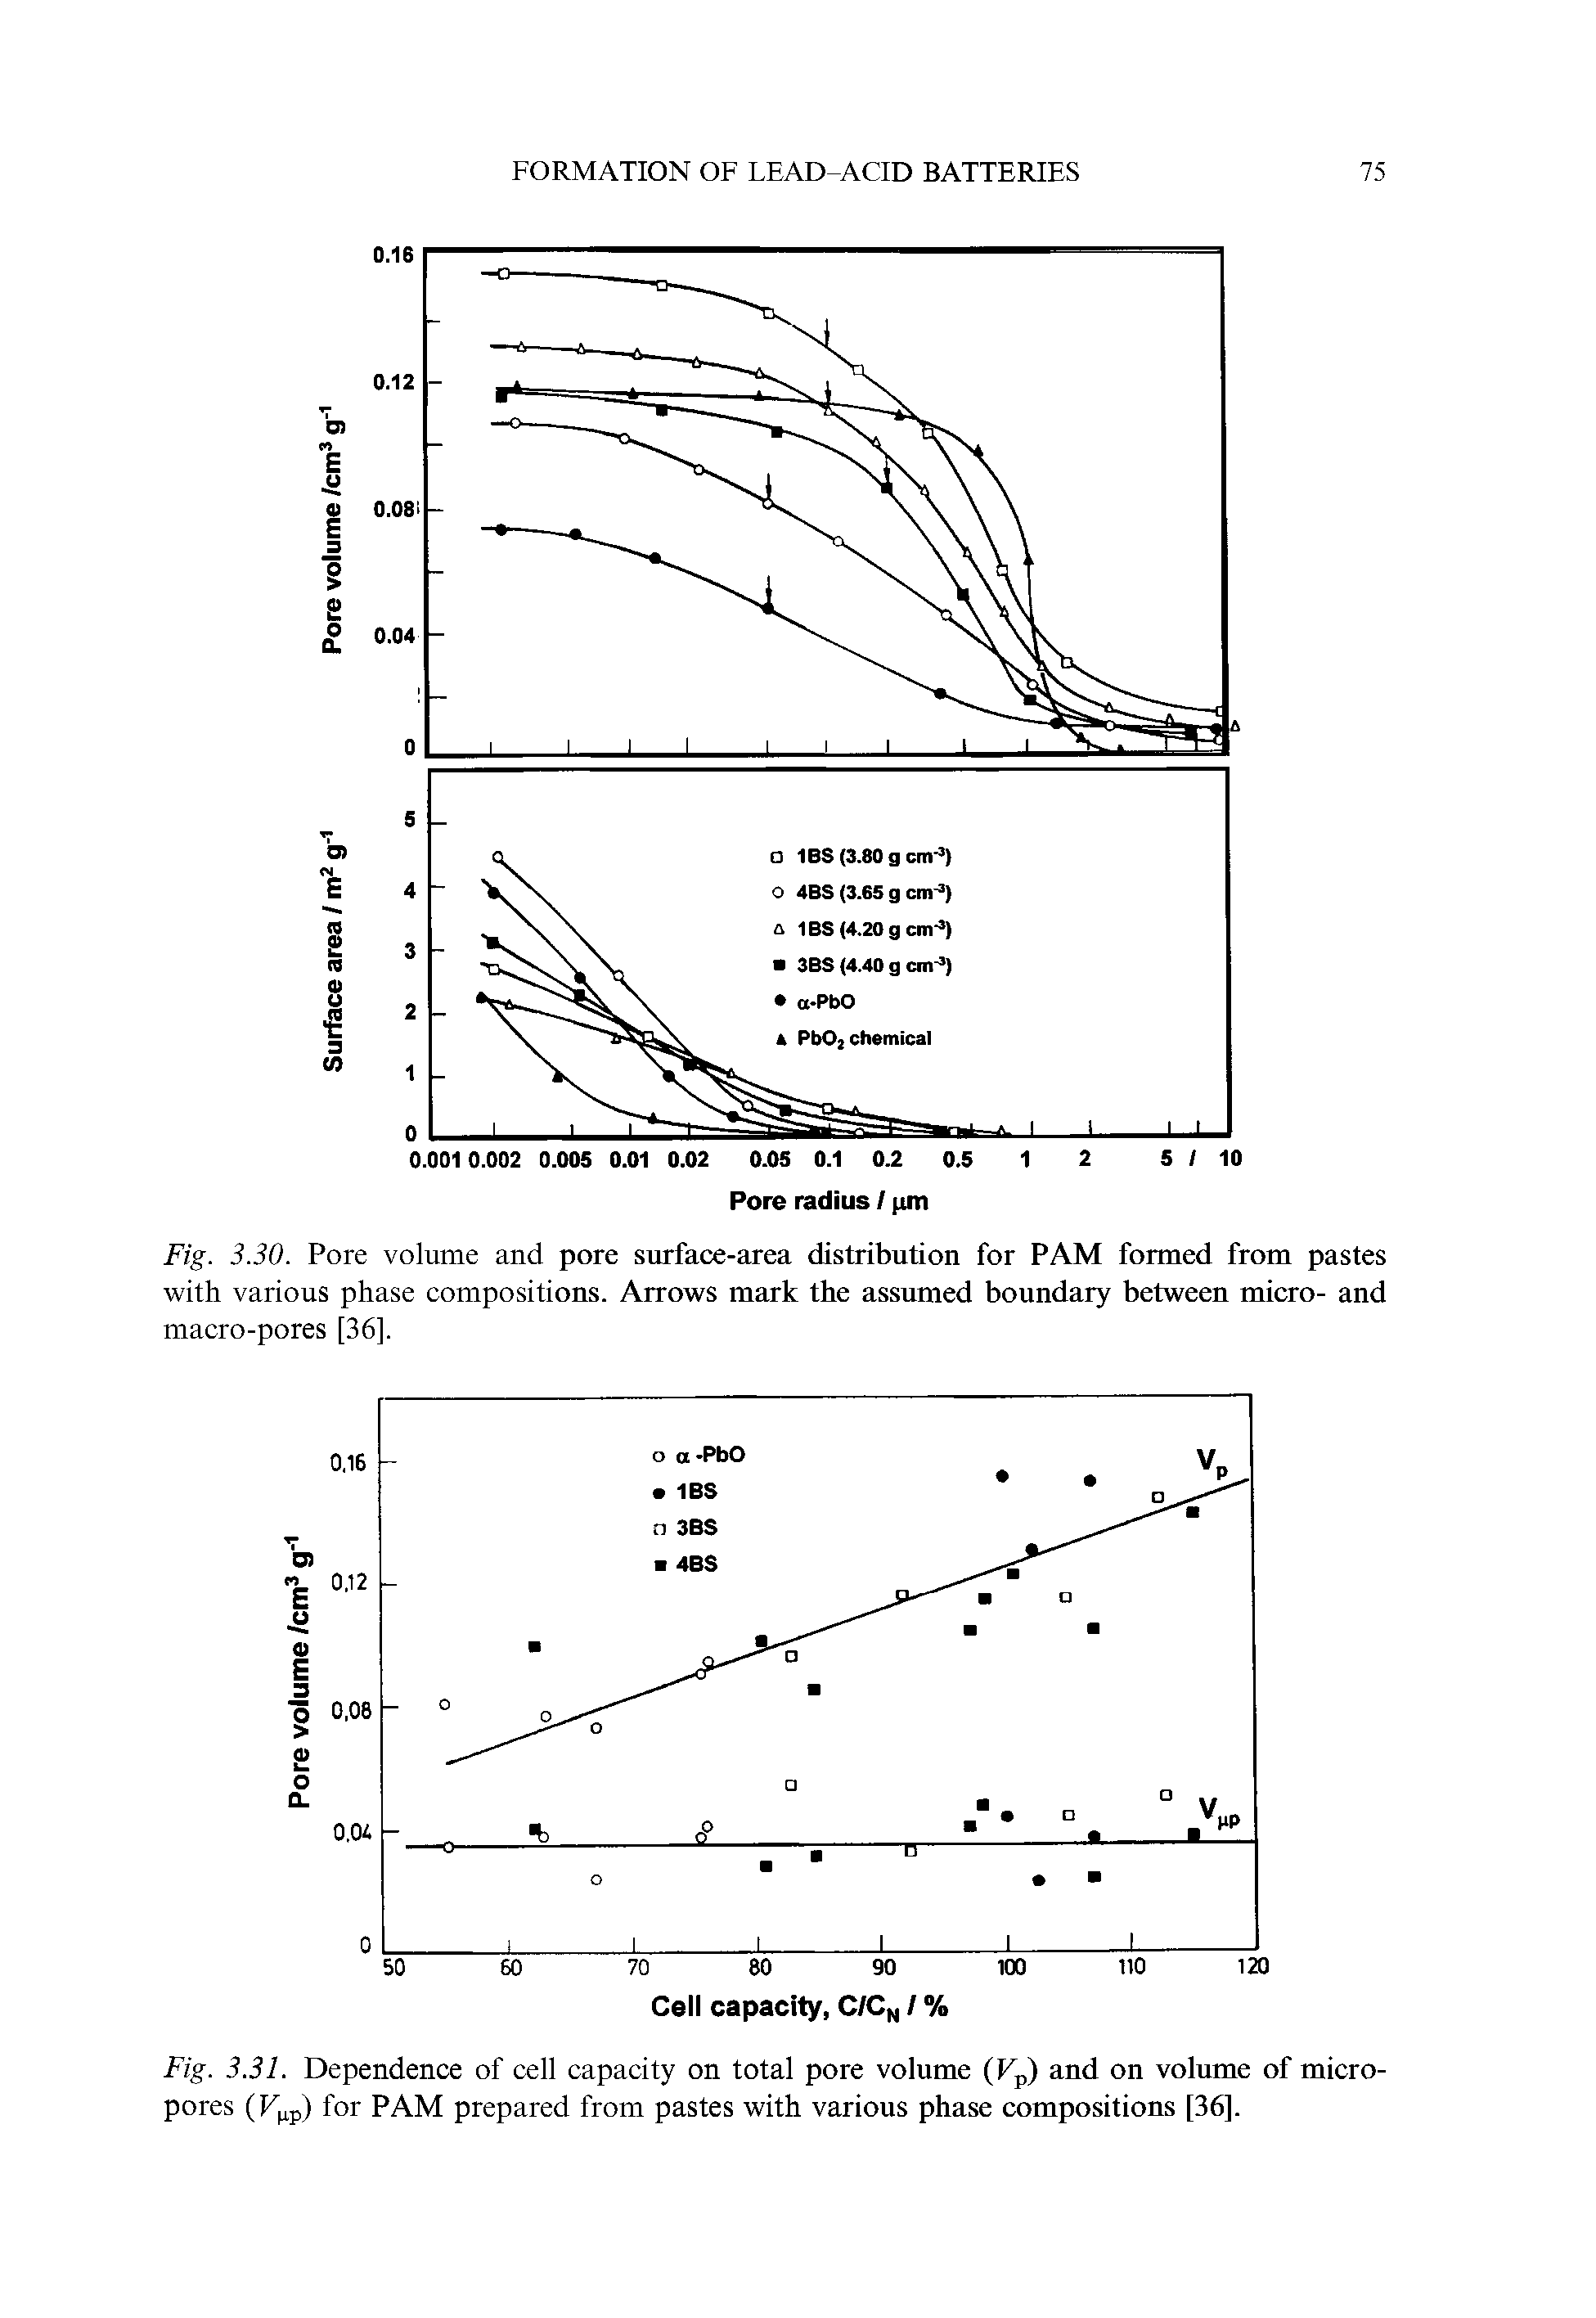 Fig. 3.31. Dependence of cell capacity on total pore volume (Kp) and on volume of micropores (F p) for PAM prepared from pastes with various phase compositions [36].